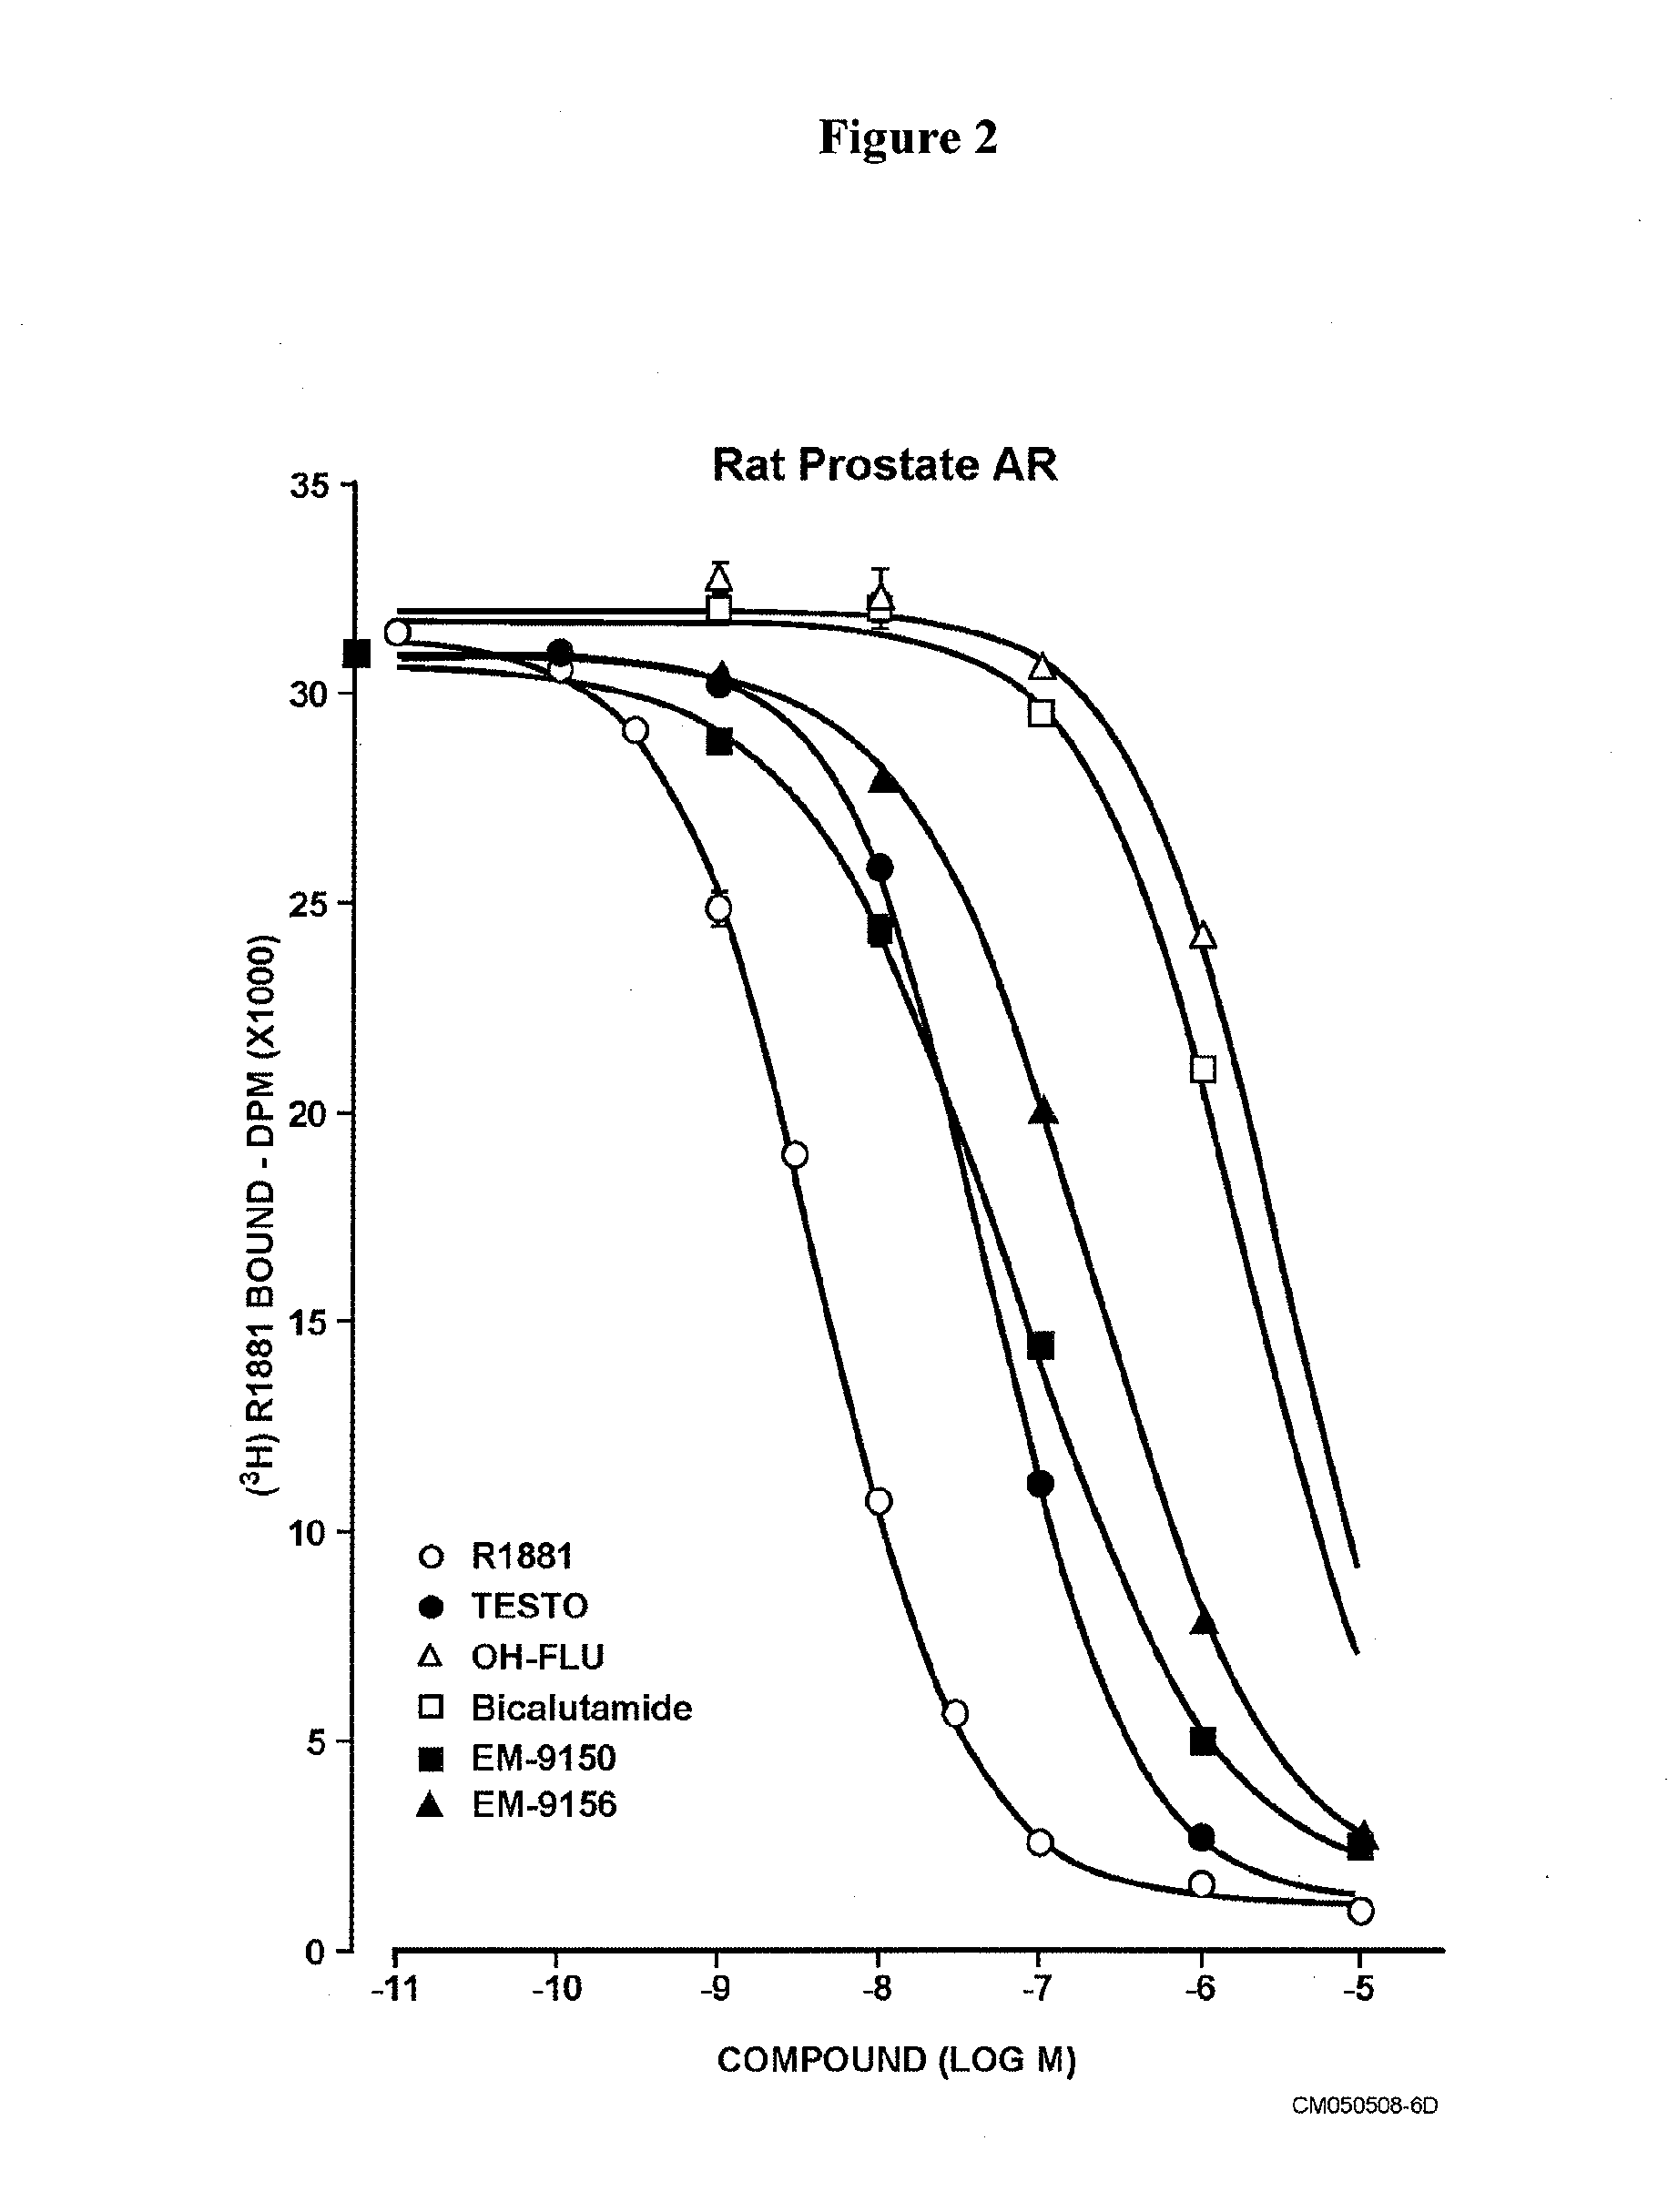 Non-steroidal antiandrogens and selective androgen receptor modulators with a pyridyl moiety